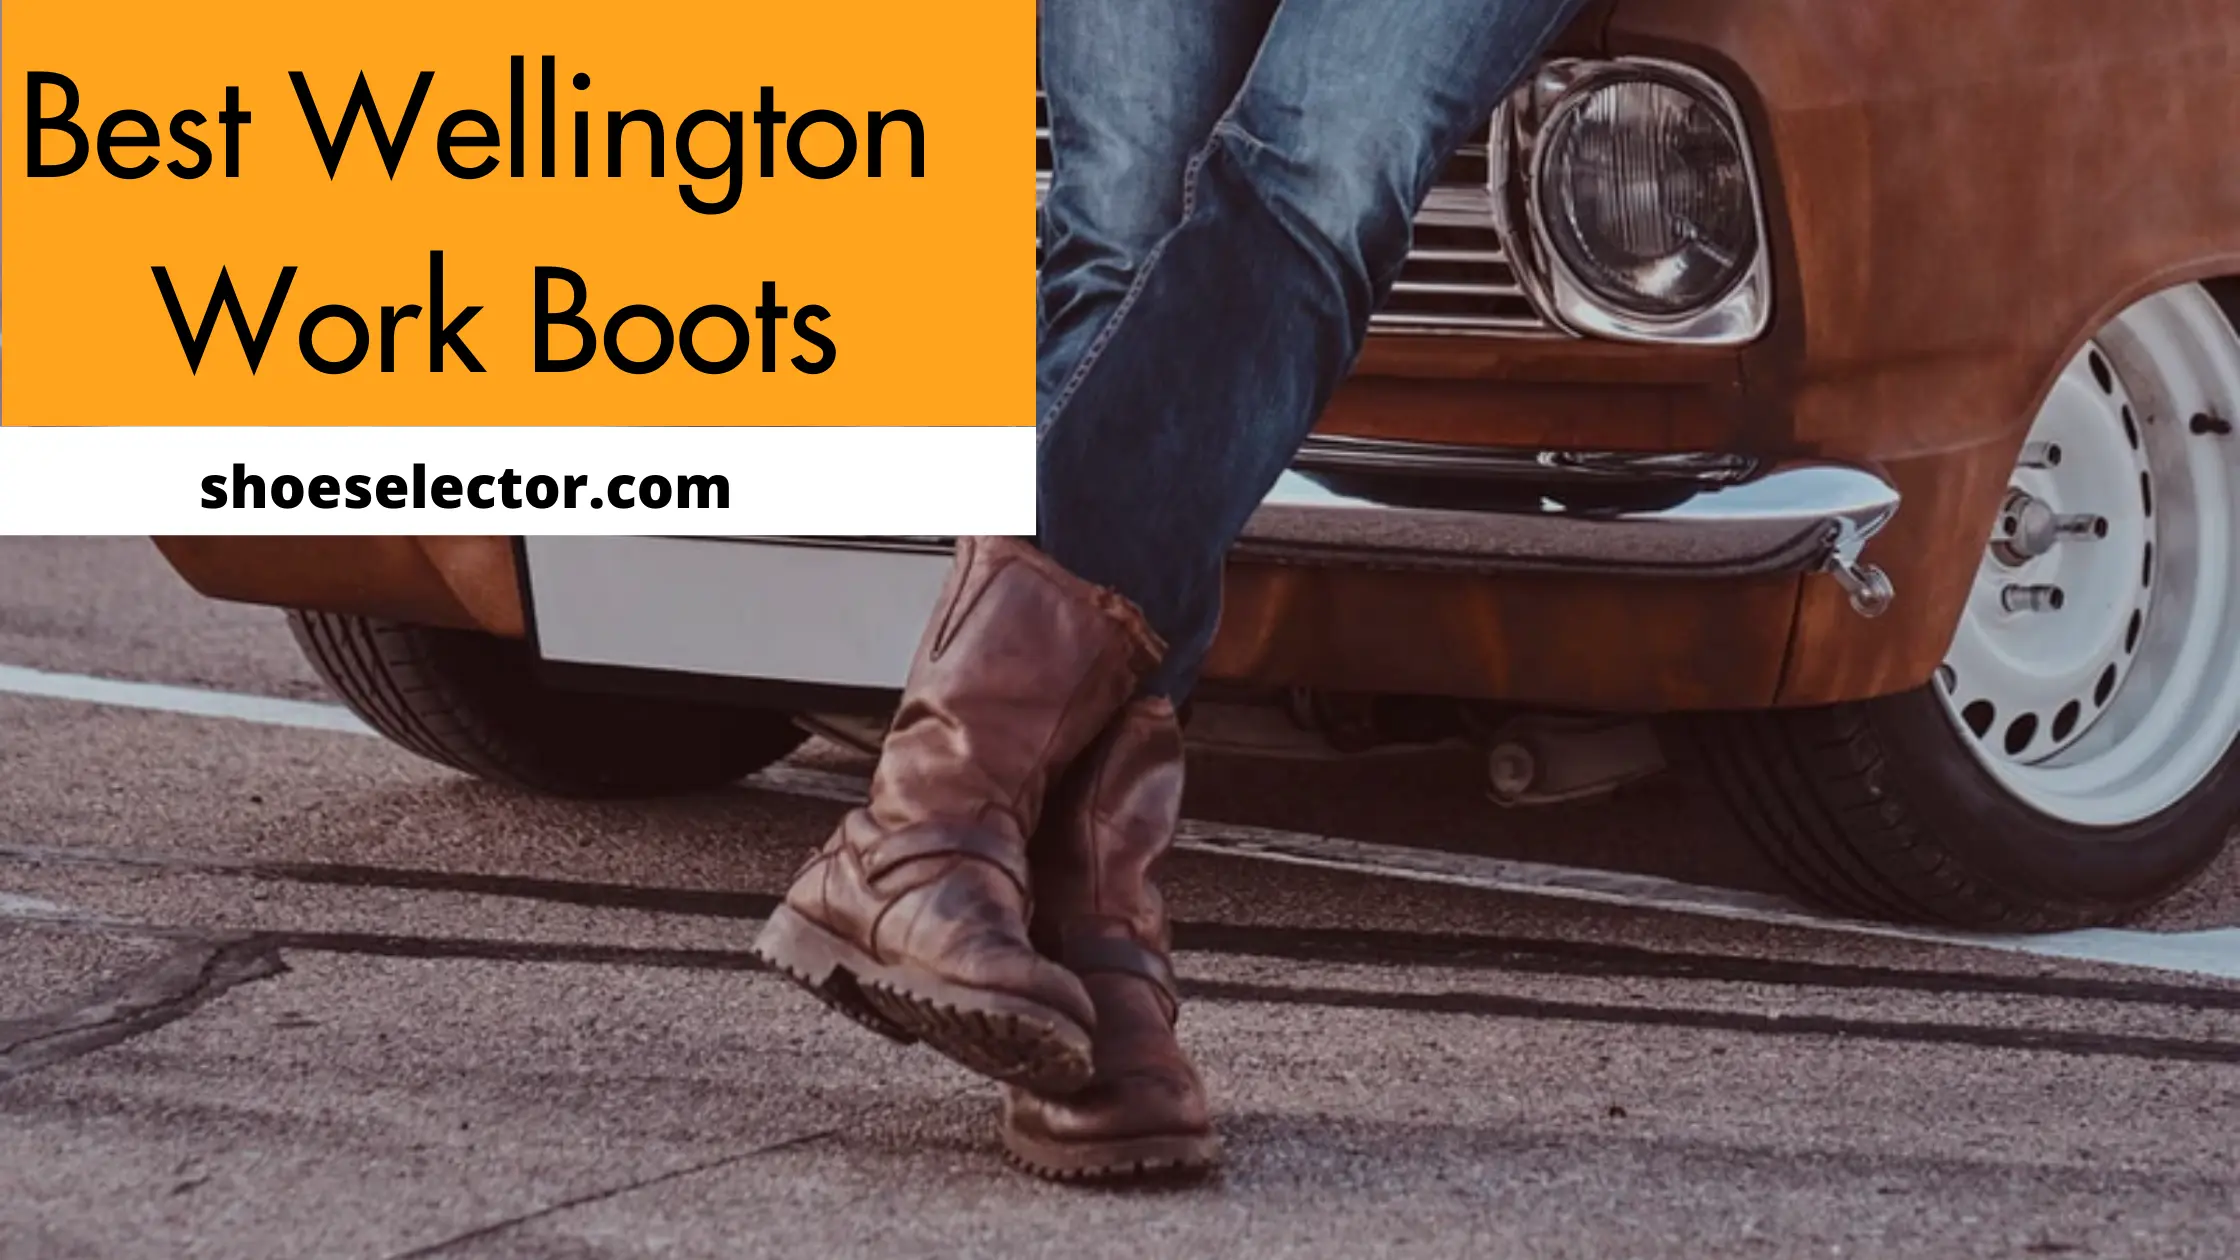 Best Wellington Work Boots - Recommended Guide